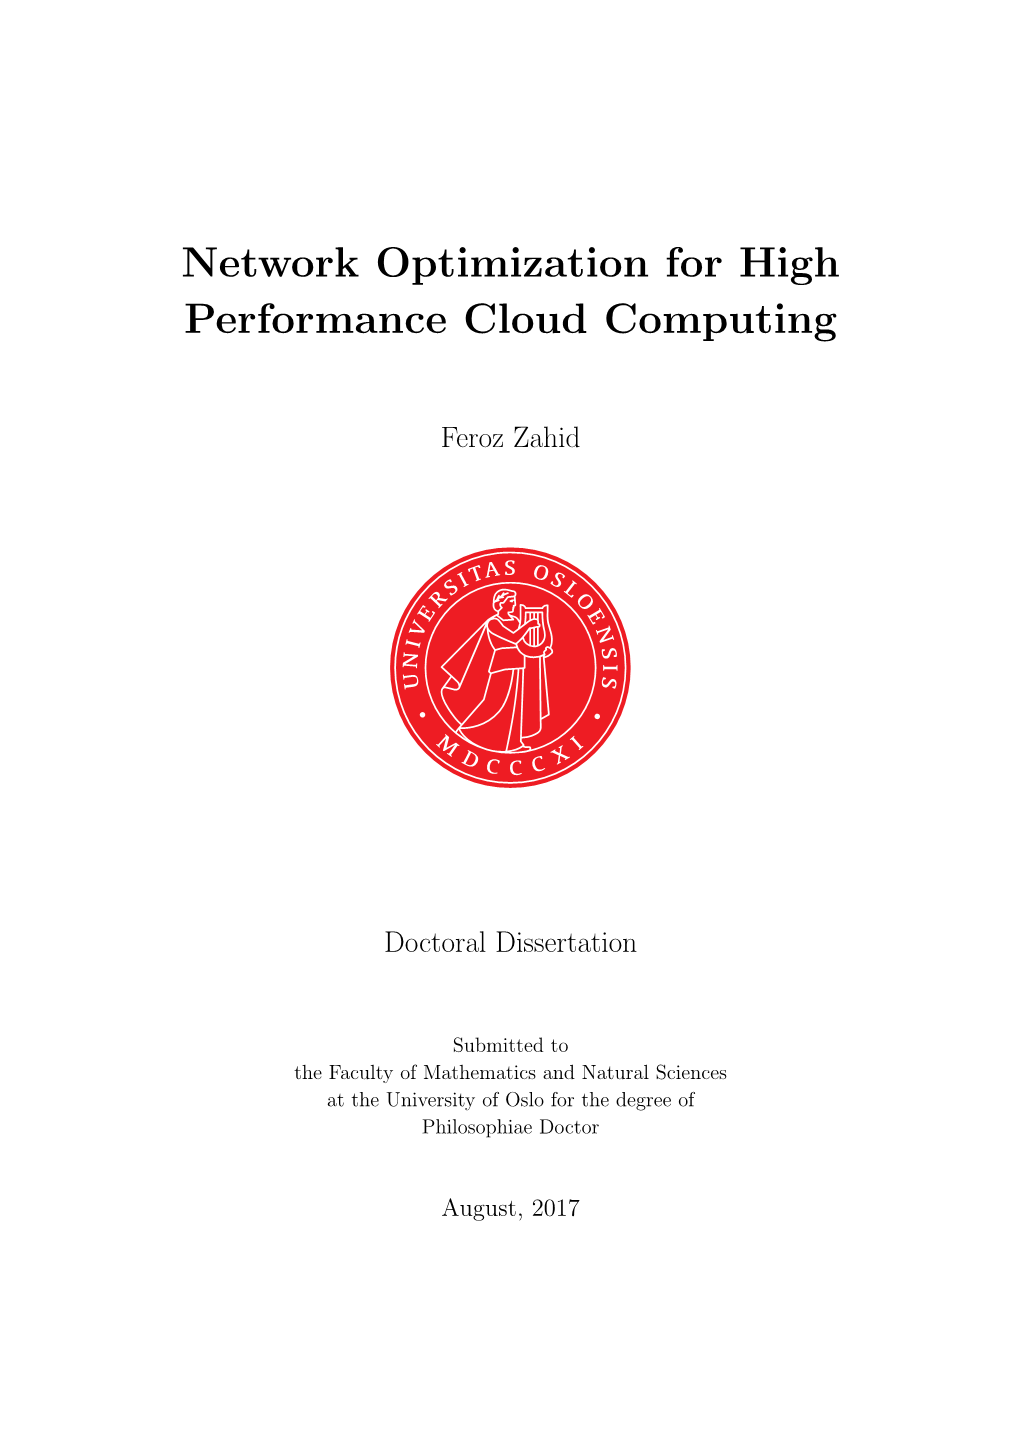 Network Optimization for High Performance Cloud Computing